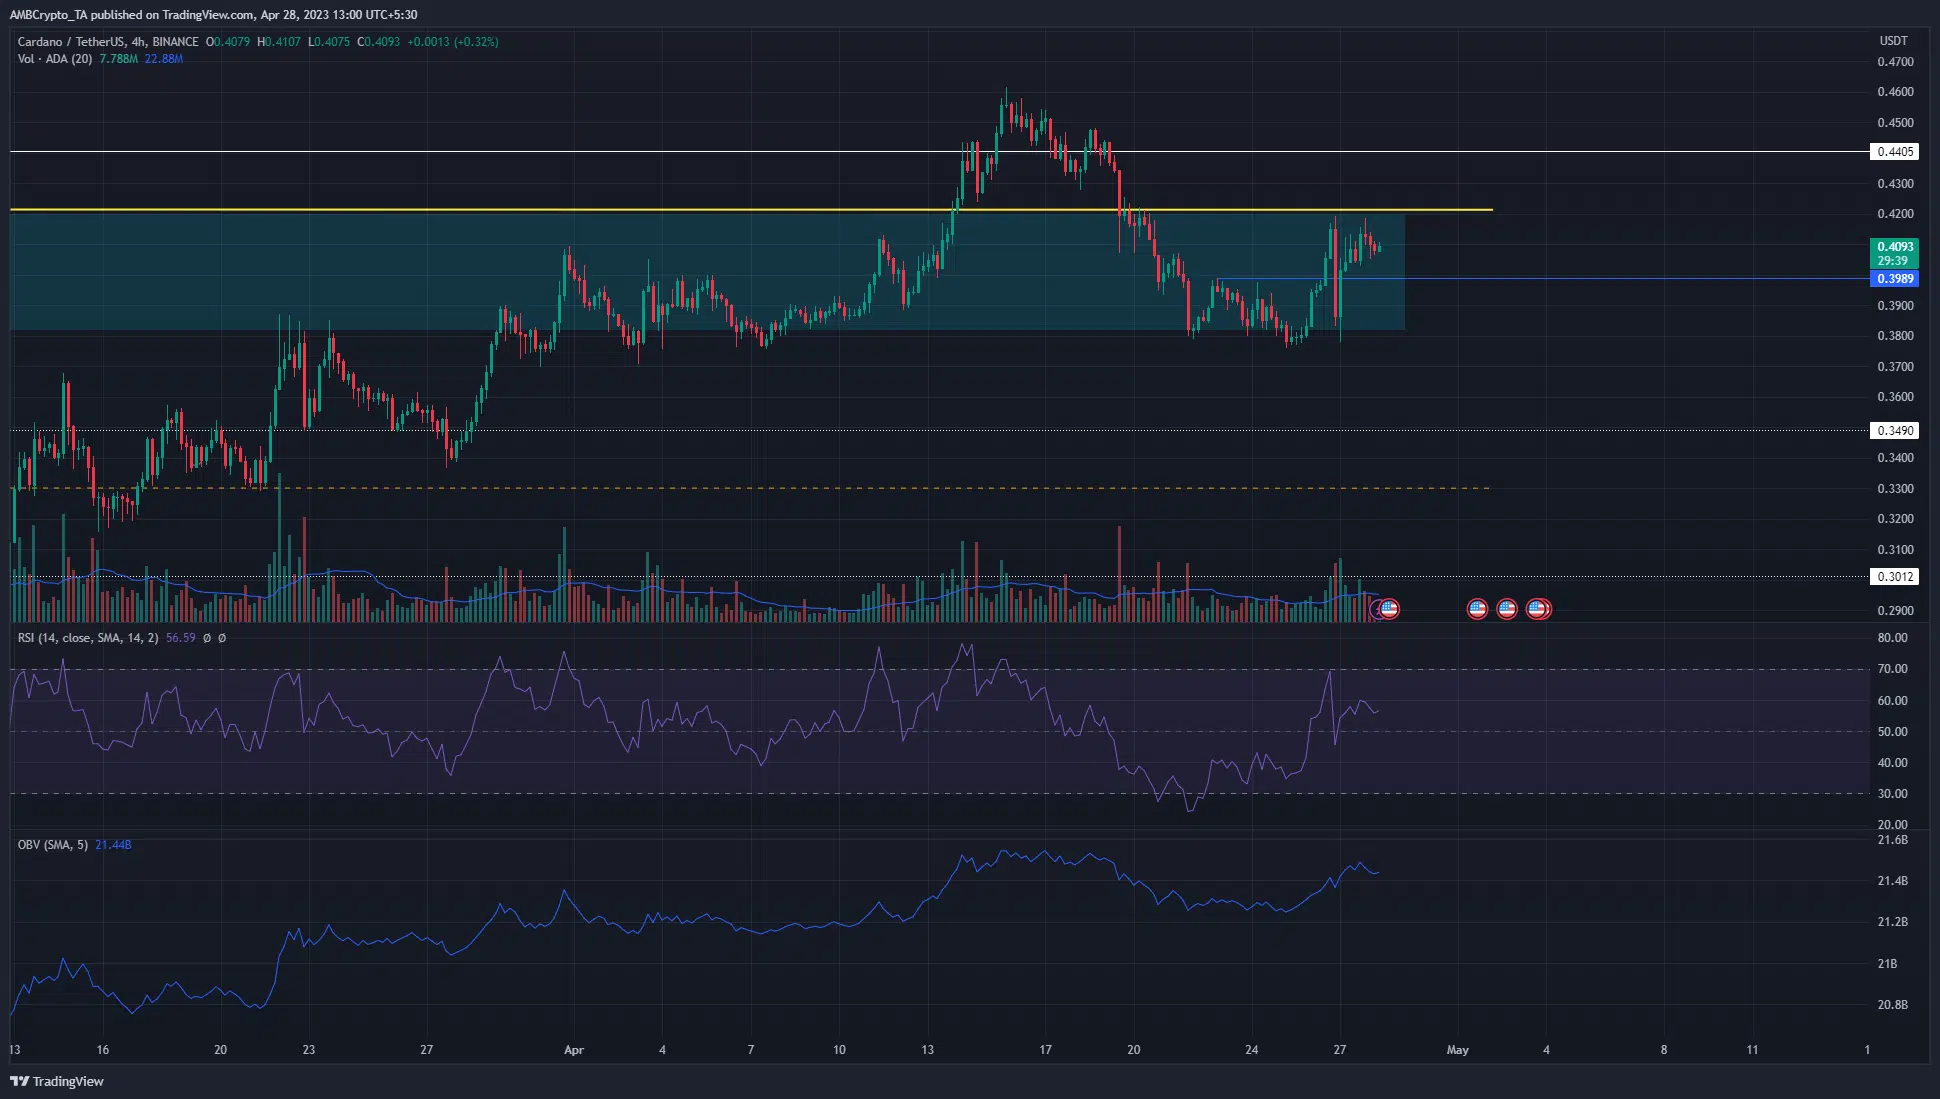 Cardano ready for a blast off past $0.42, but only if...